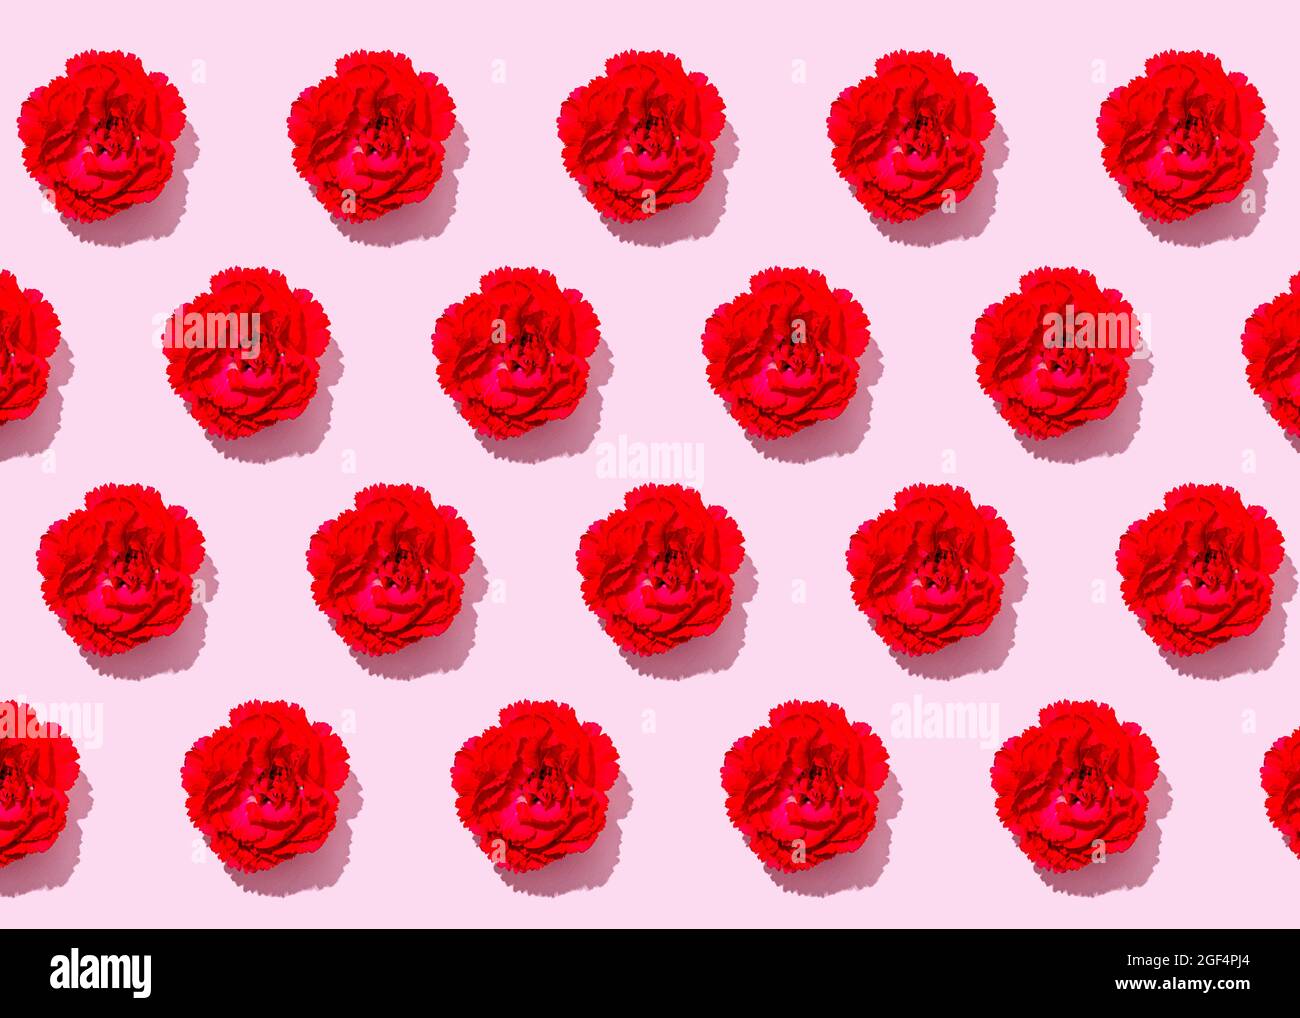 Pattern of heads of red carnation flowers flat laid against pink background Stock Photo